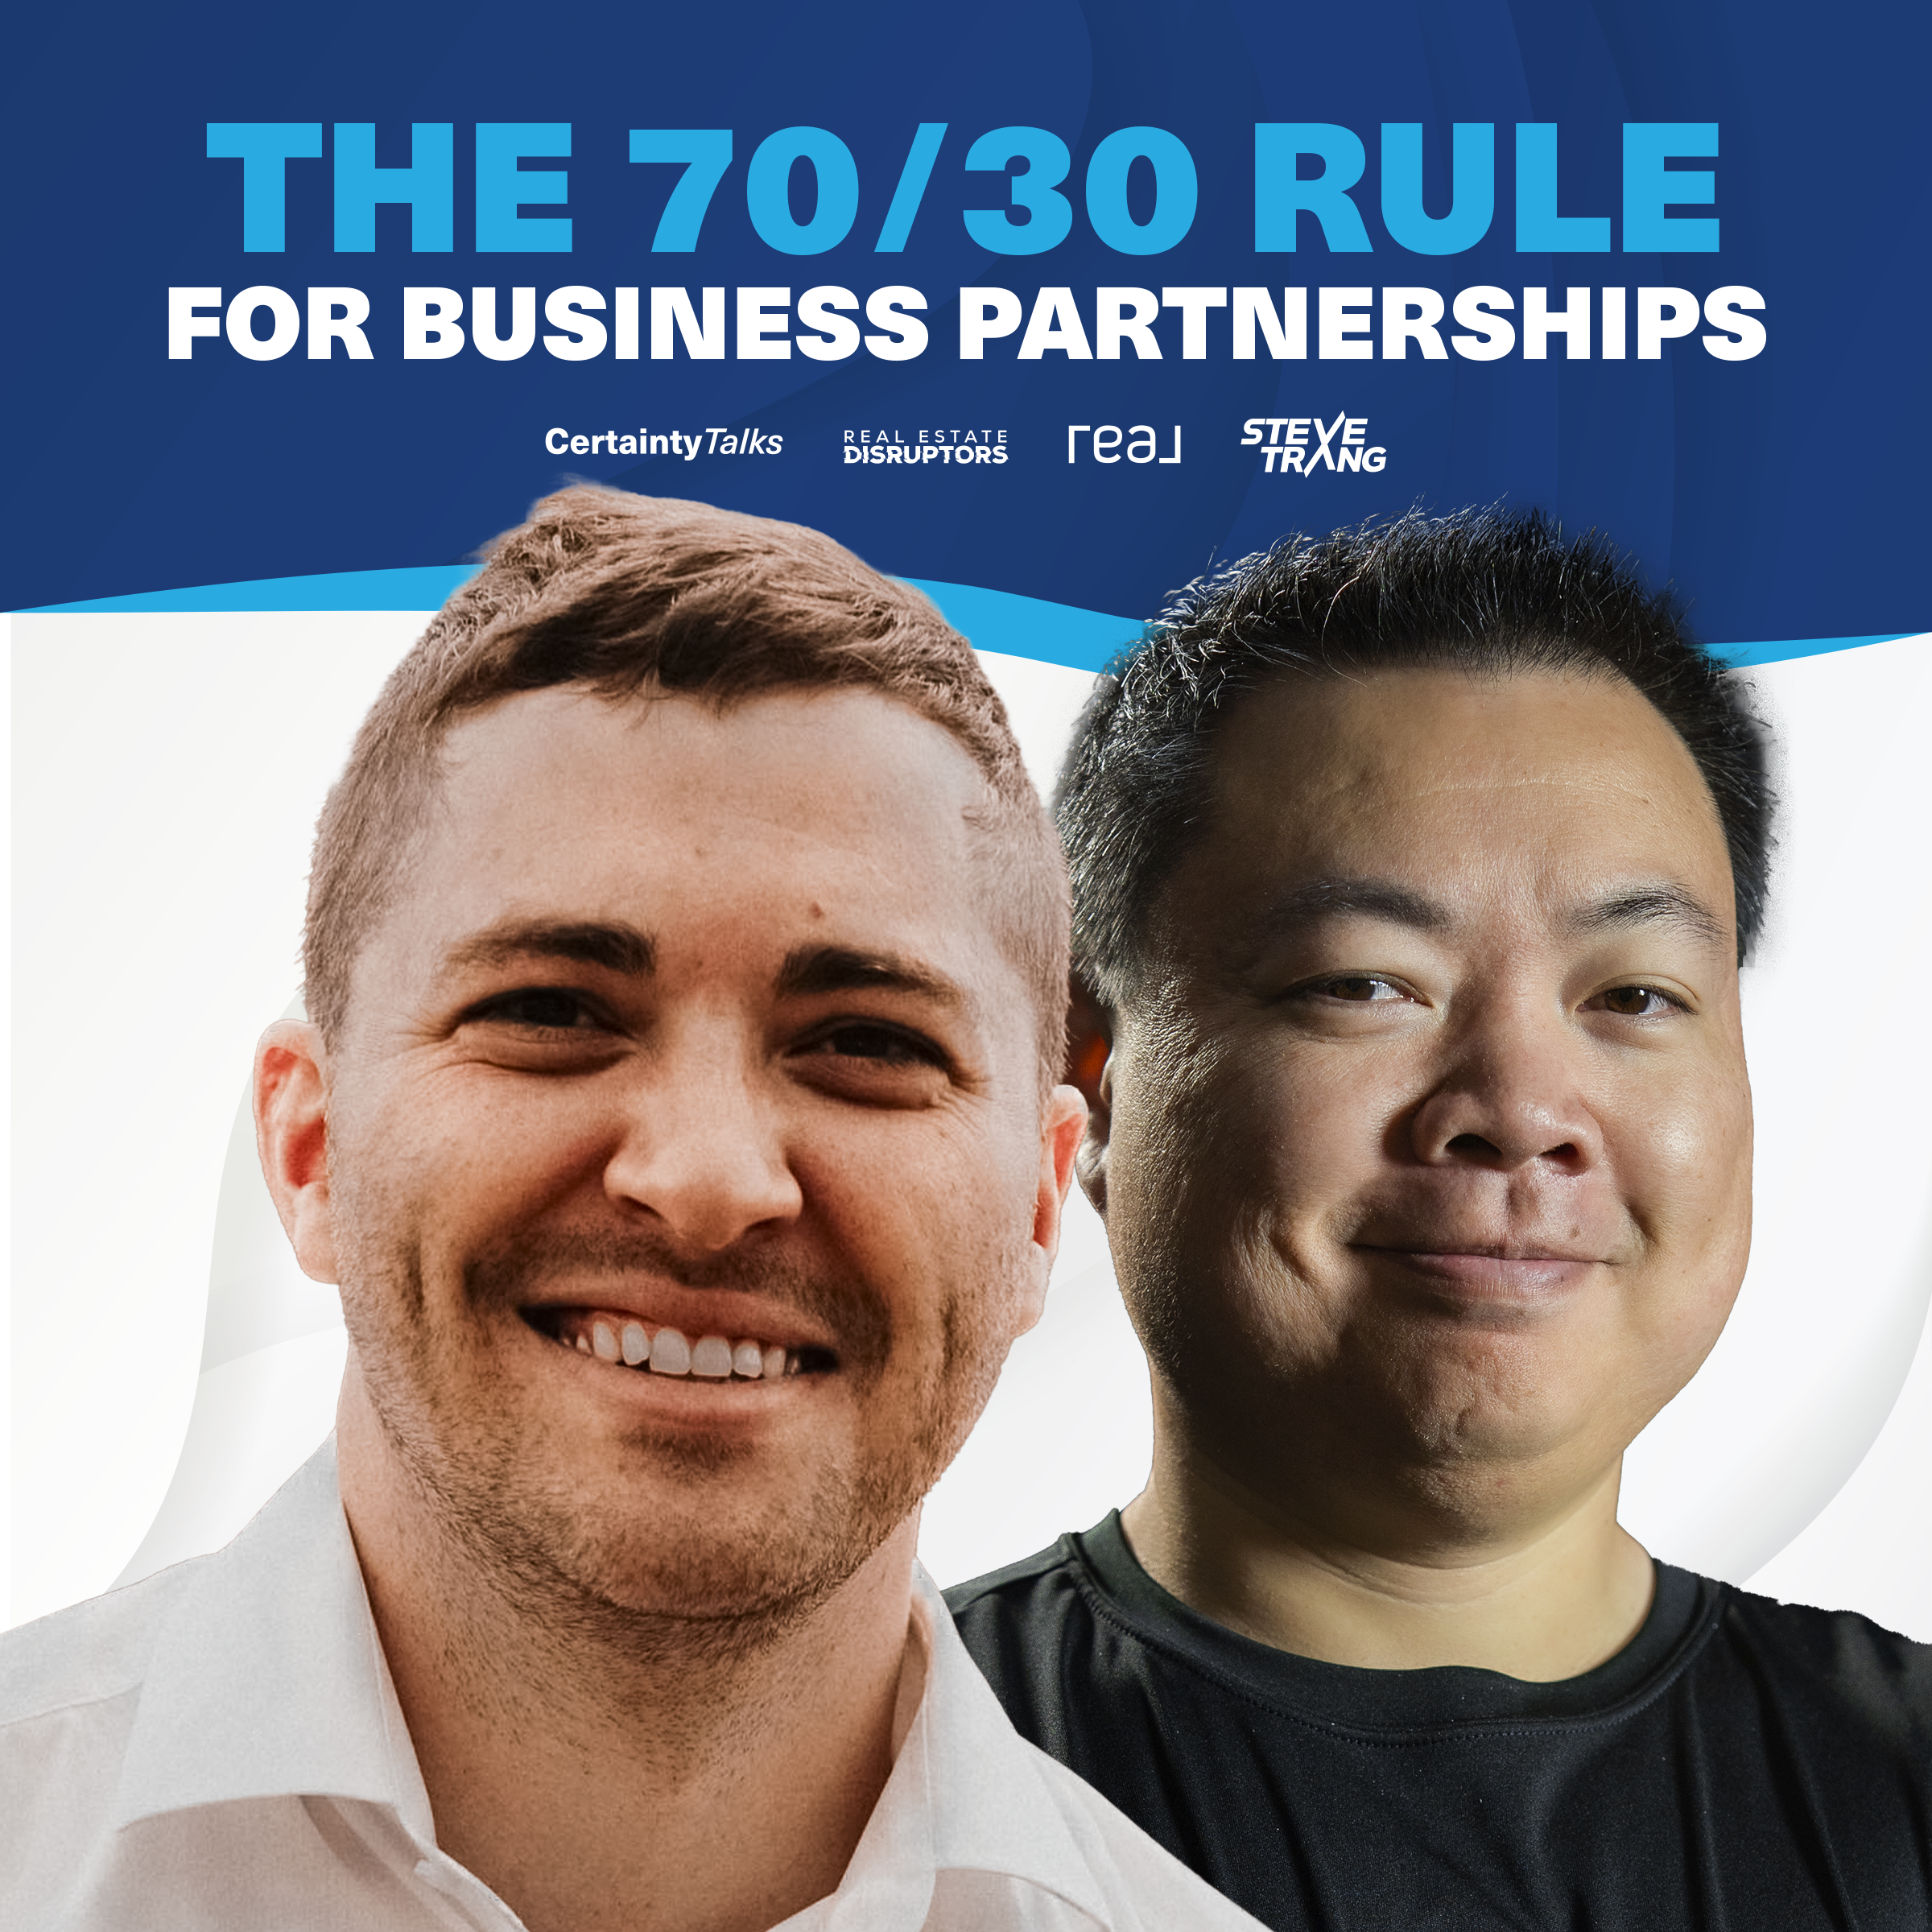 The 70/30 Rule For Business Partnerships